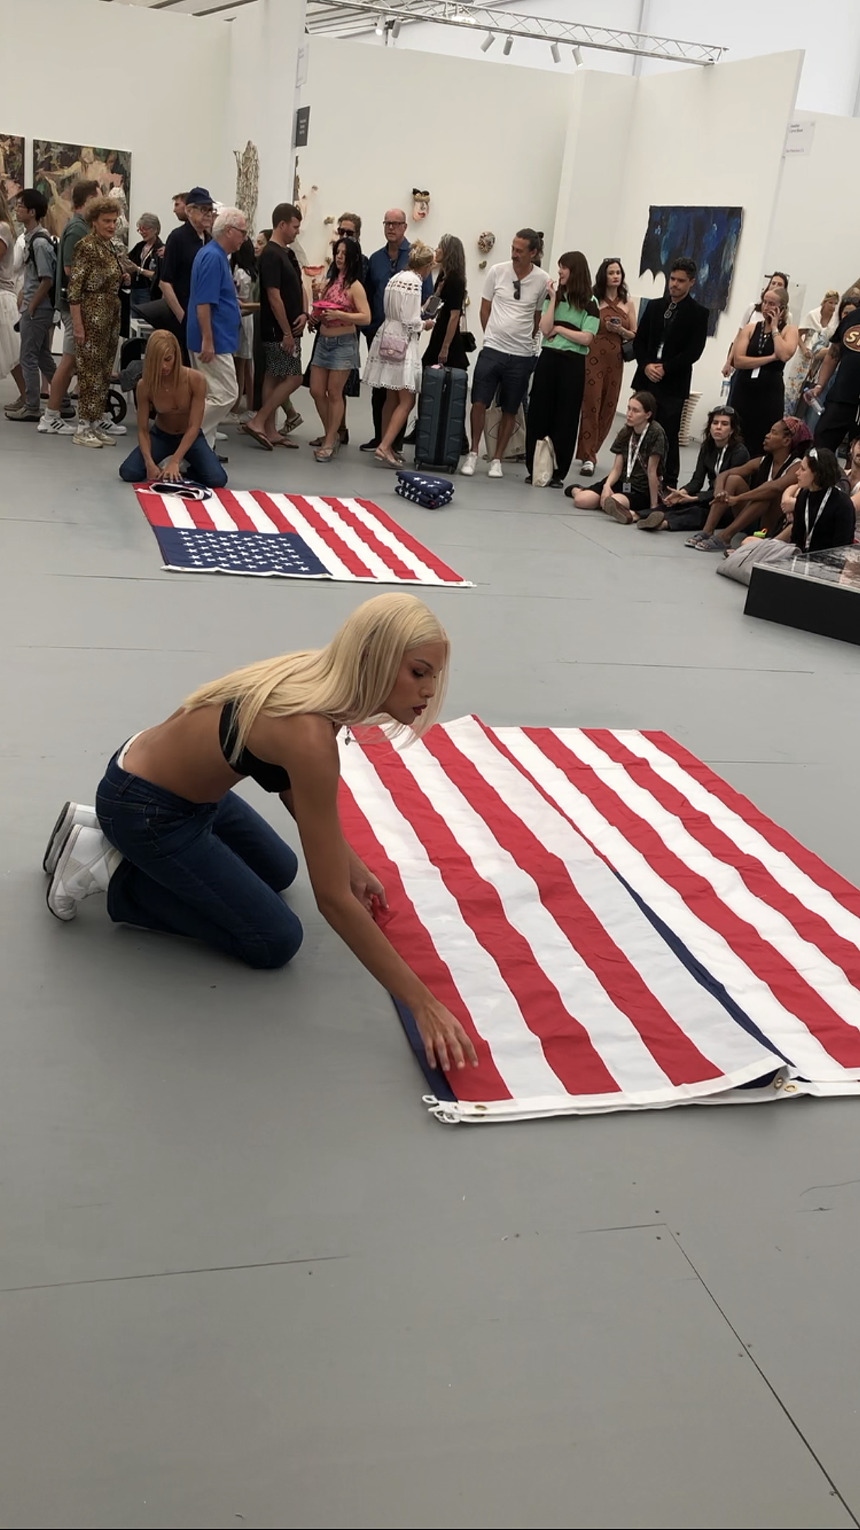 Two transgender women fold American flags as part of the performance art of Ms. Z Tye at Untitled art fair in Miami Beach